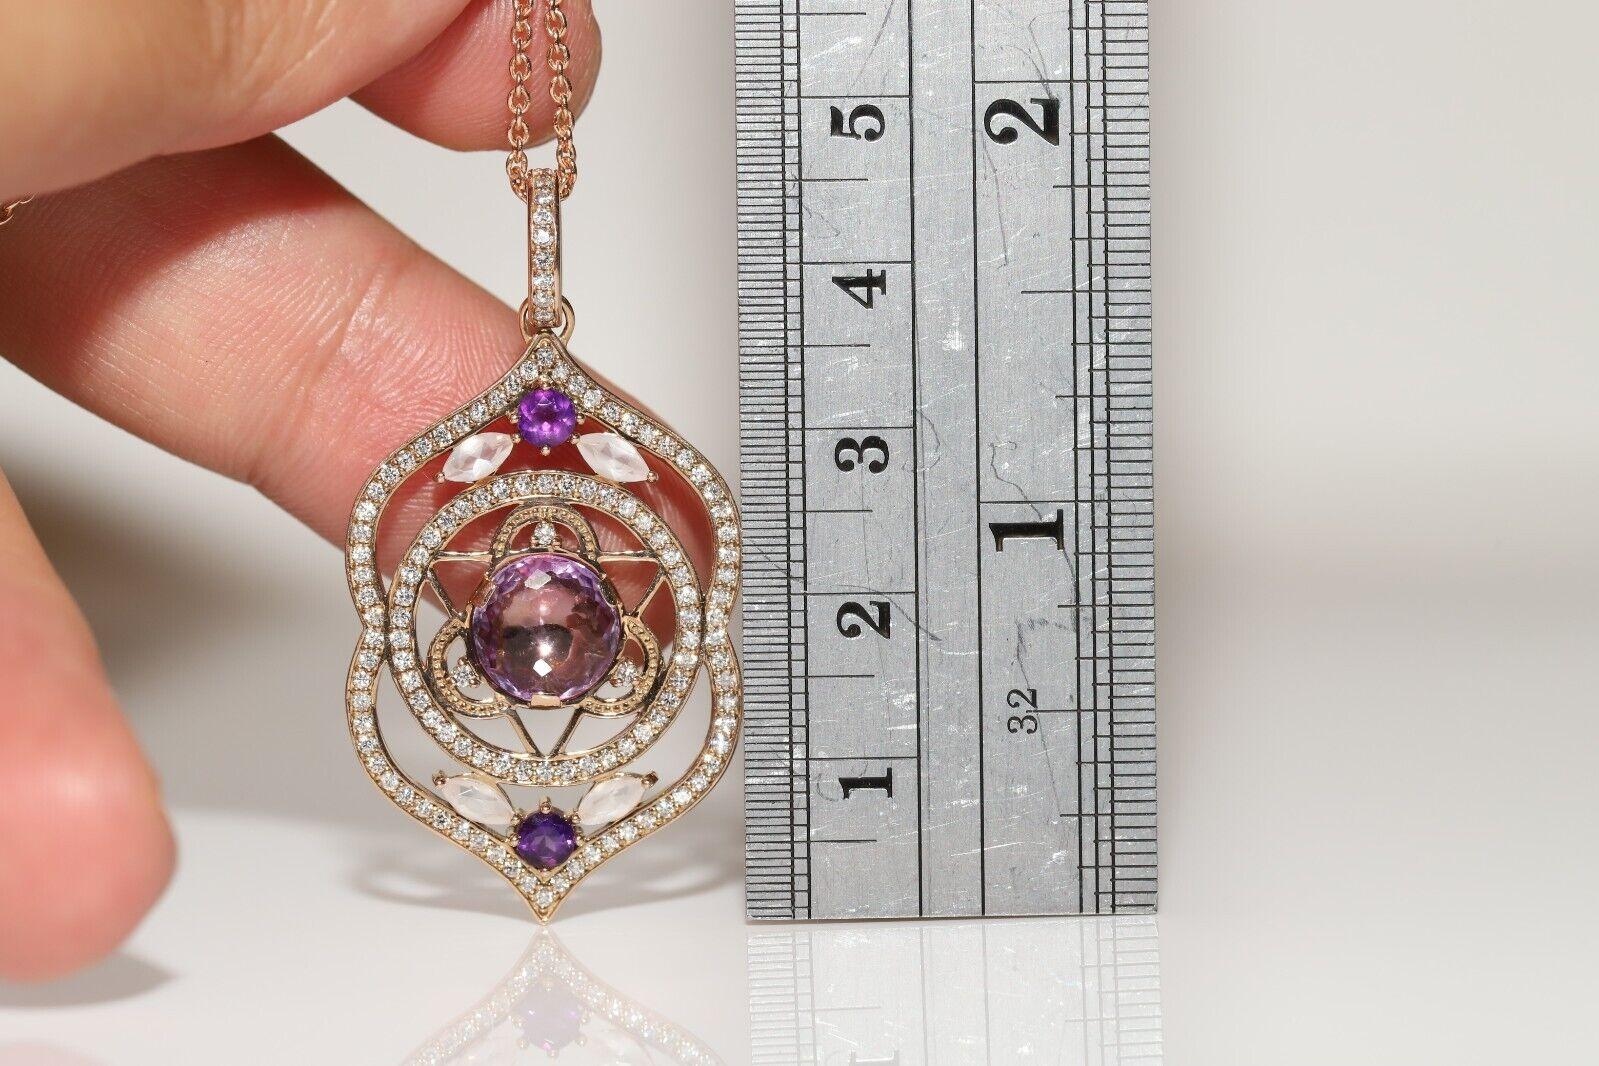 Retro 18k Gold Natural Diamond And Amethyst Decrated Pretty Pendant Necklace For Sale